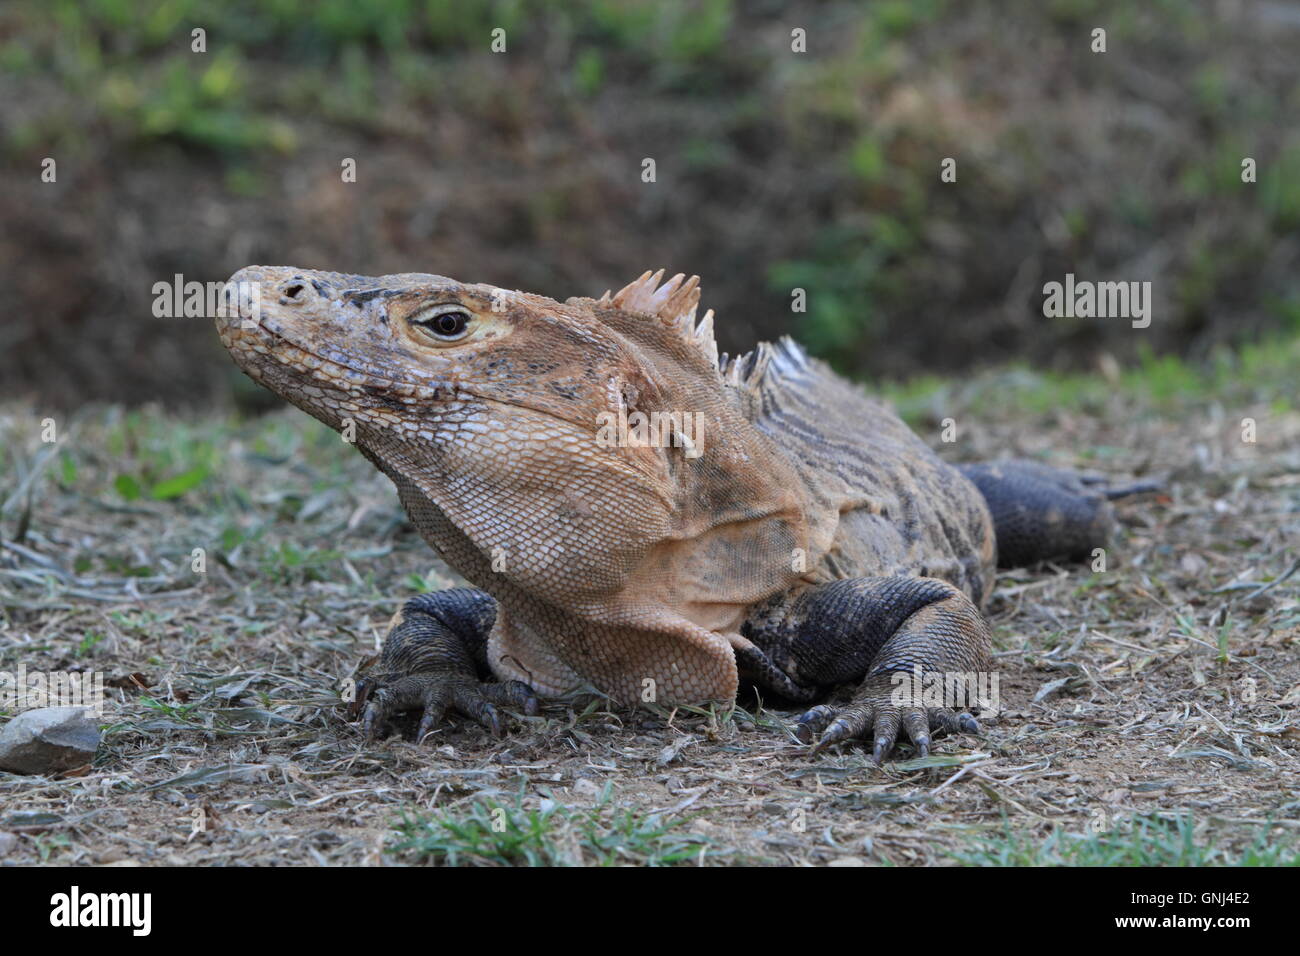 A black spiny tailed iguana (Ctenosaura similis) sitting in the grass on the Pacific Coast of Costa Rica, Central America. Stock Photo